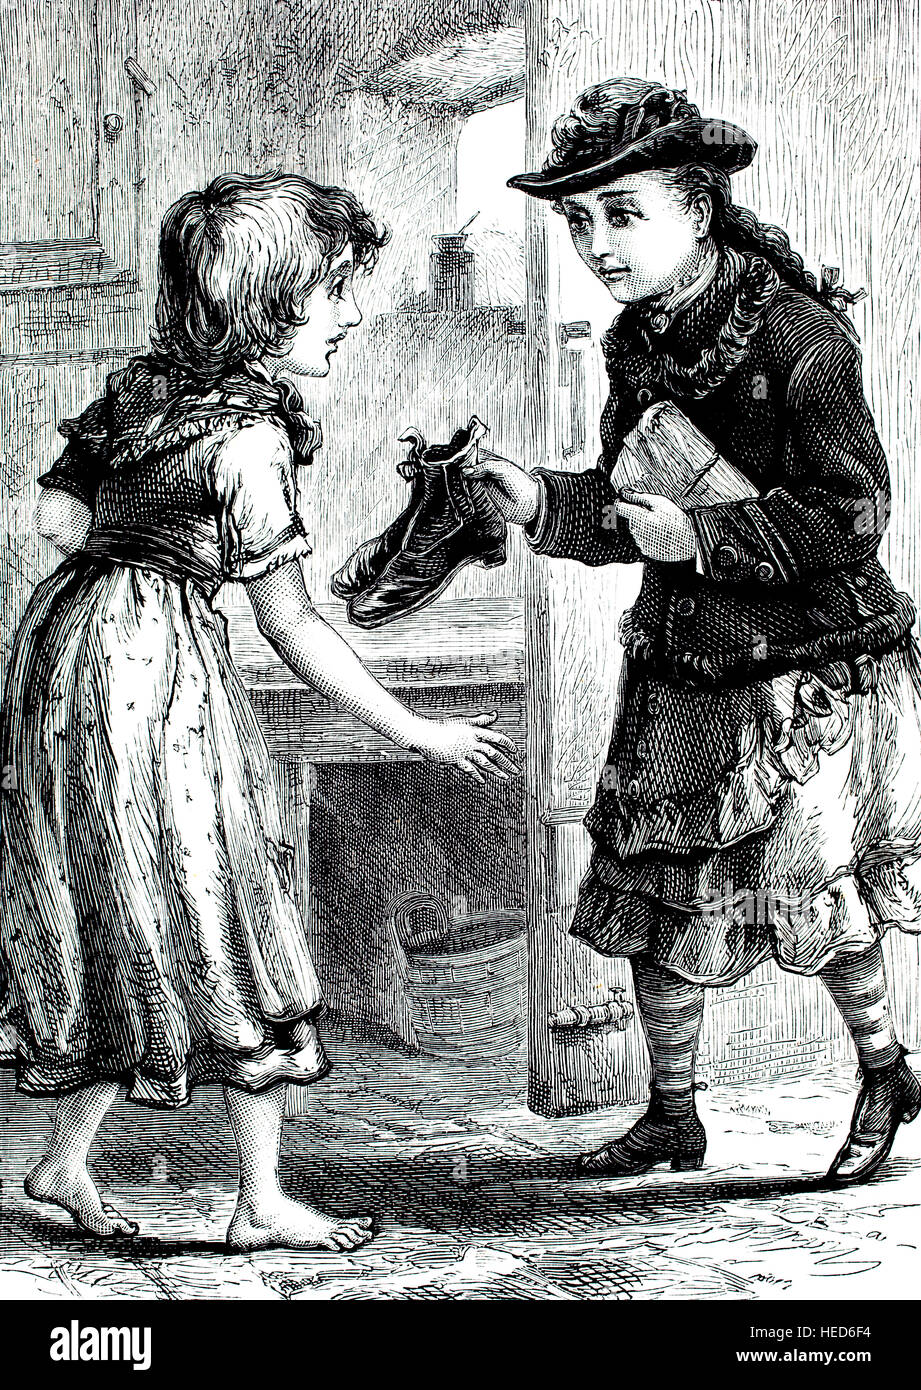 wealthy girl giving shoes to poverty stricken child, illustration from 1884 Chatterbox weekly children’s paper Stock Photo